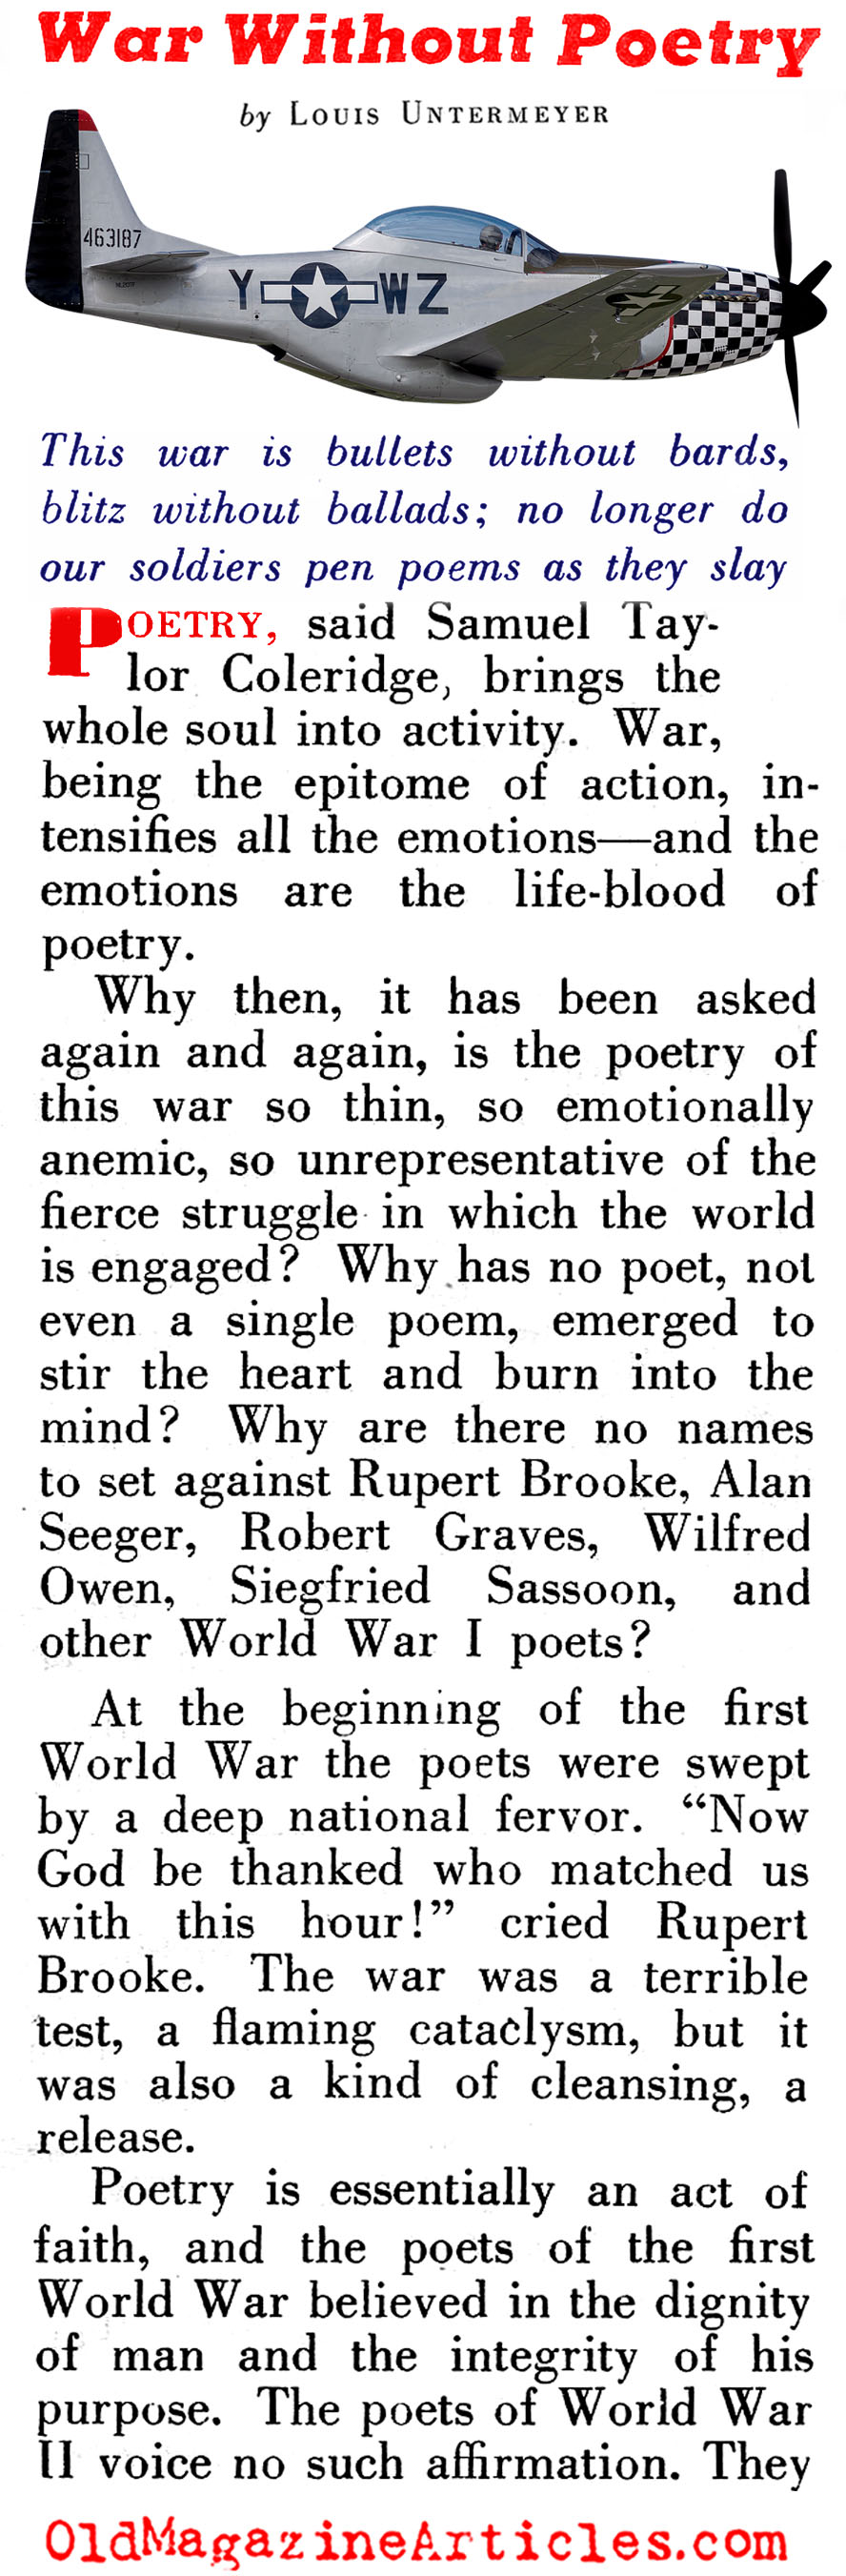 W.W. II and the Absent Poets (Pageant Magazine, 1944)